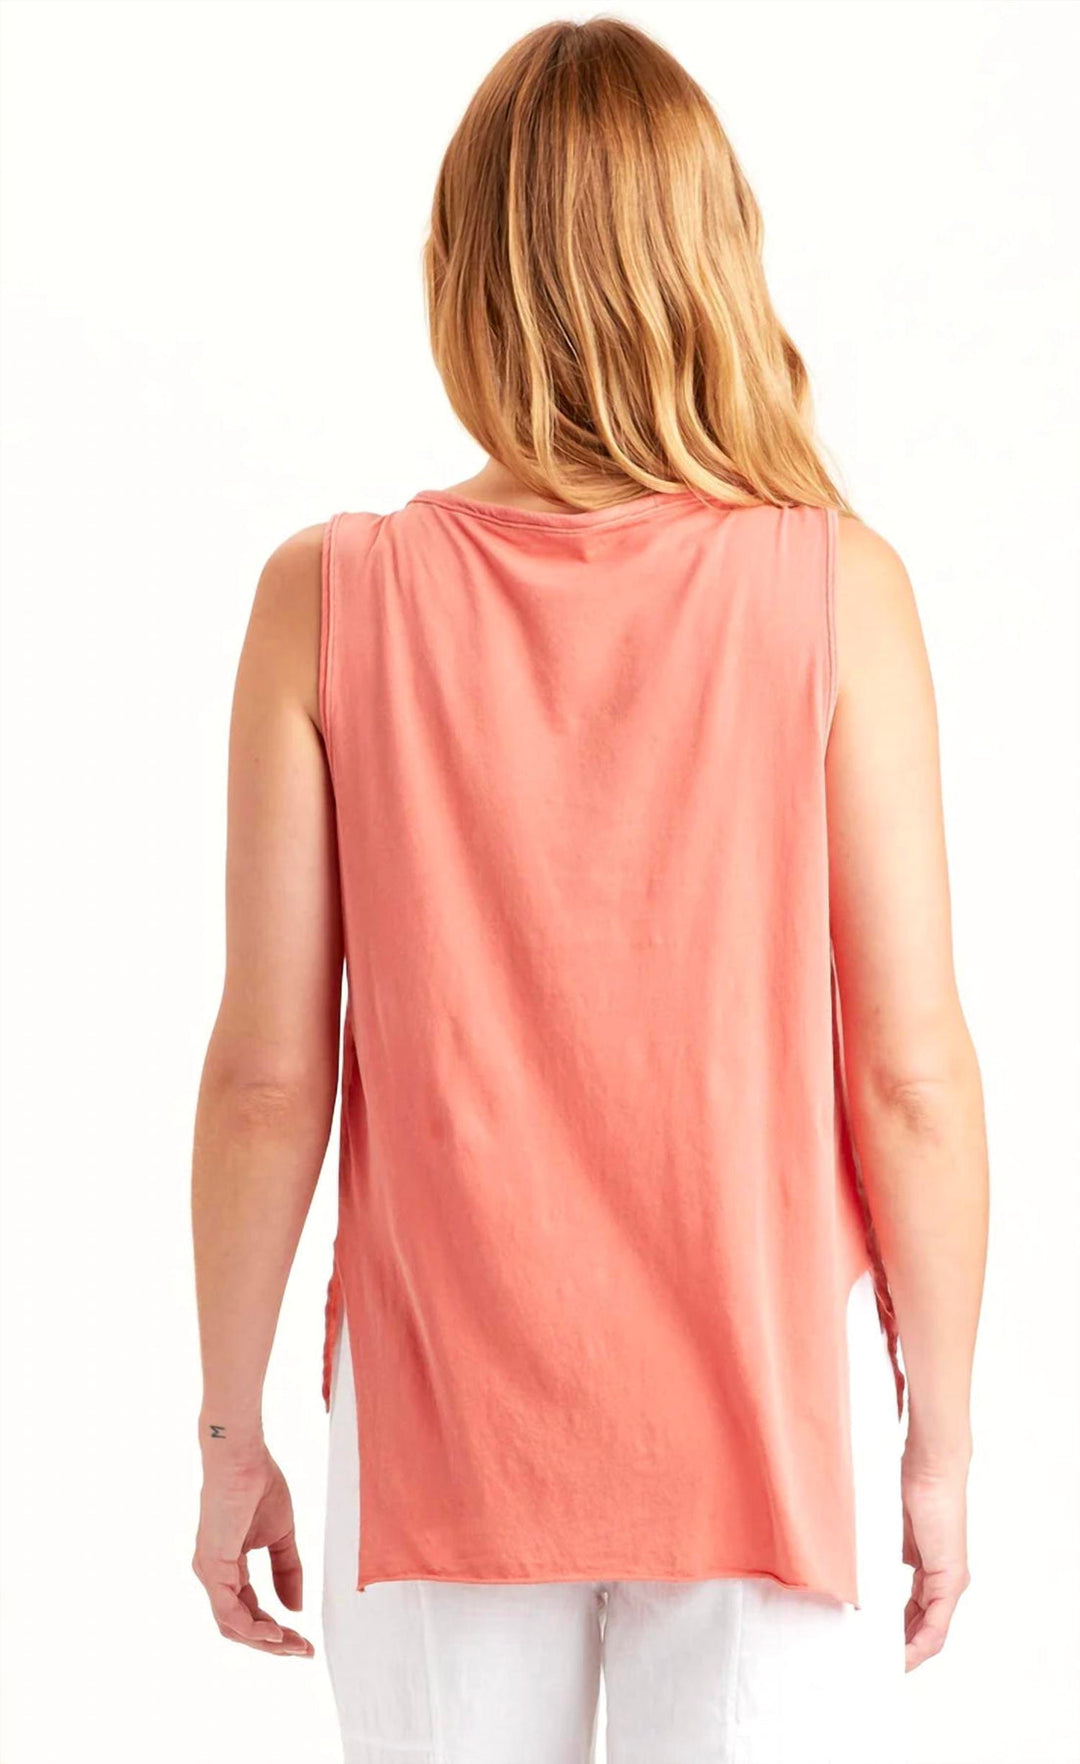 Twill Antoine Tank in Distressed Washed Rose